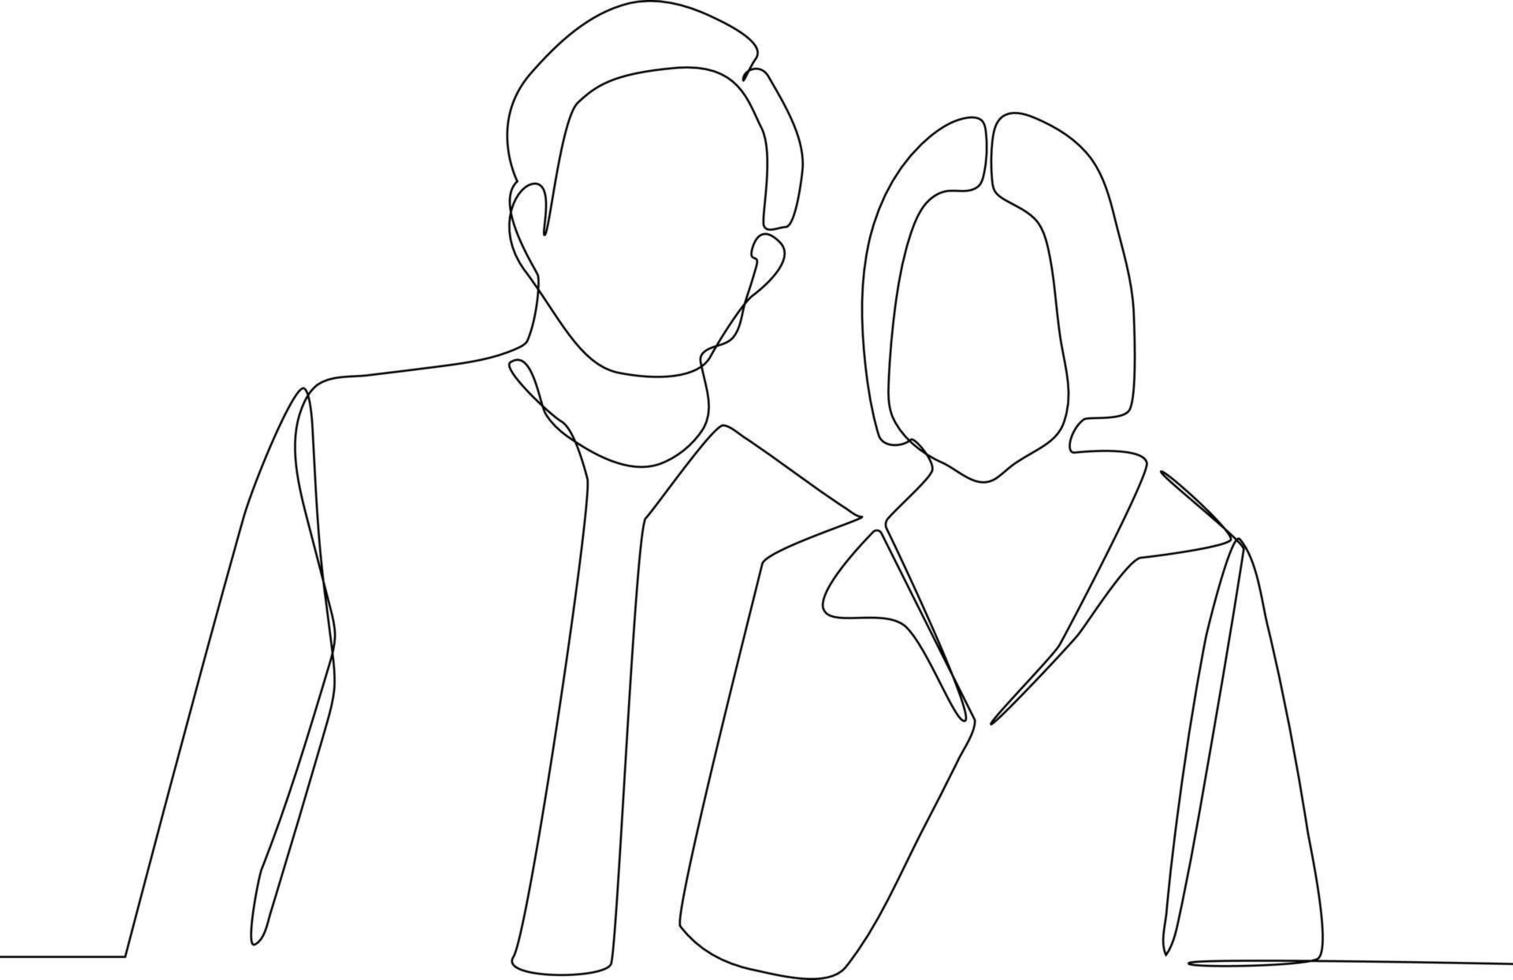 Continuous one line drawing father and daughter portrait style. Family concept. Single line draw design vector graphic illustration.